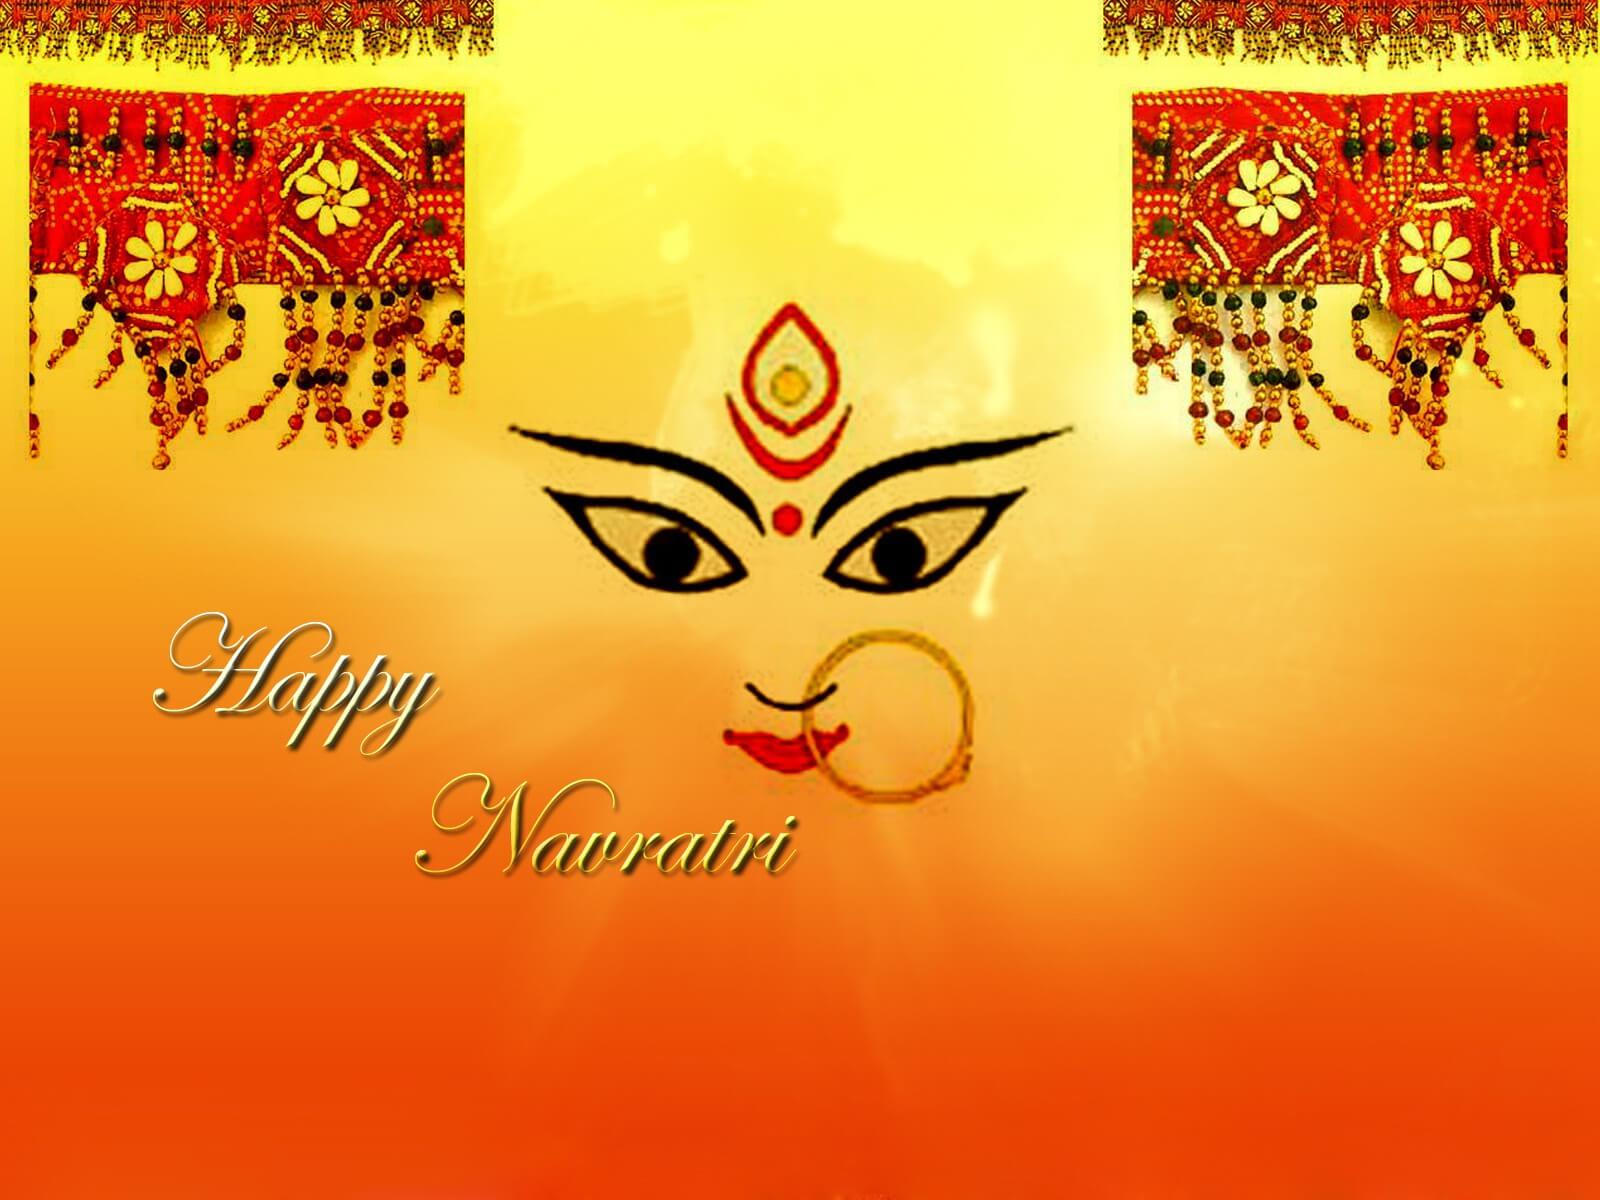 happy navratri wishes, wallpaper, greeting images